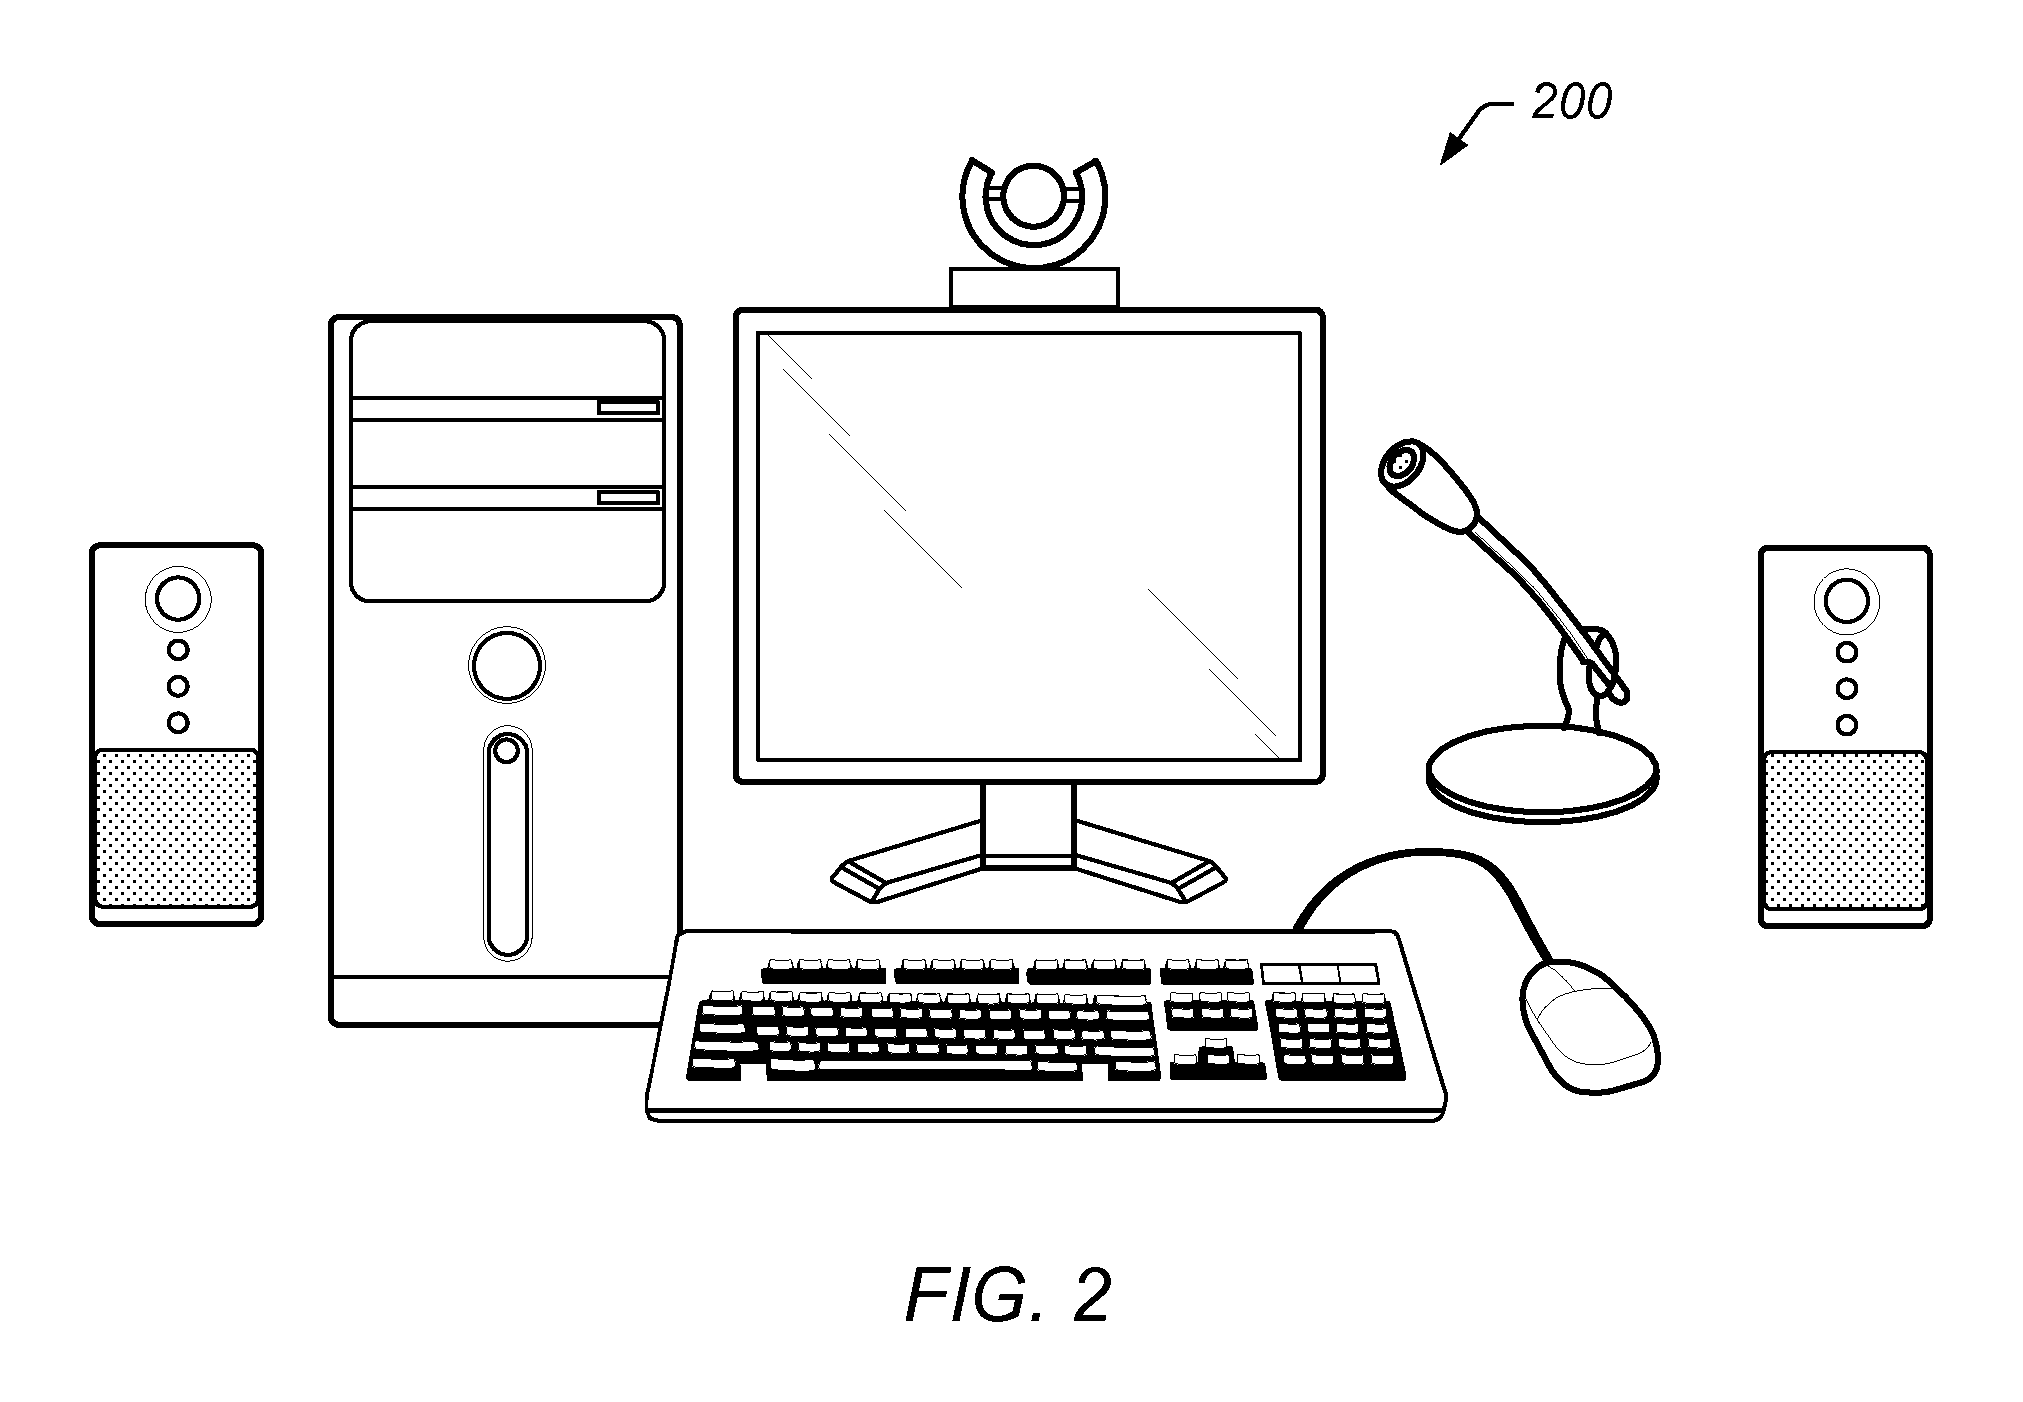 Performing Failover for a Plurality of Different Types of Videoconferencing Devices